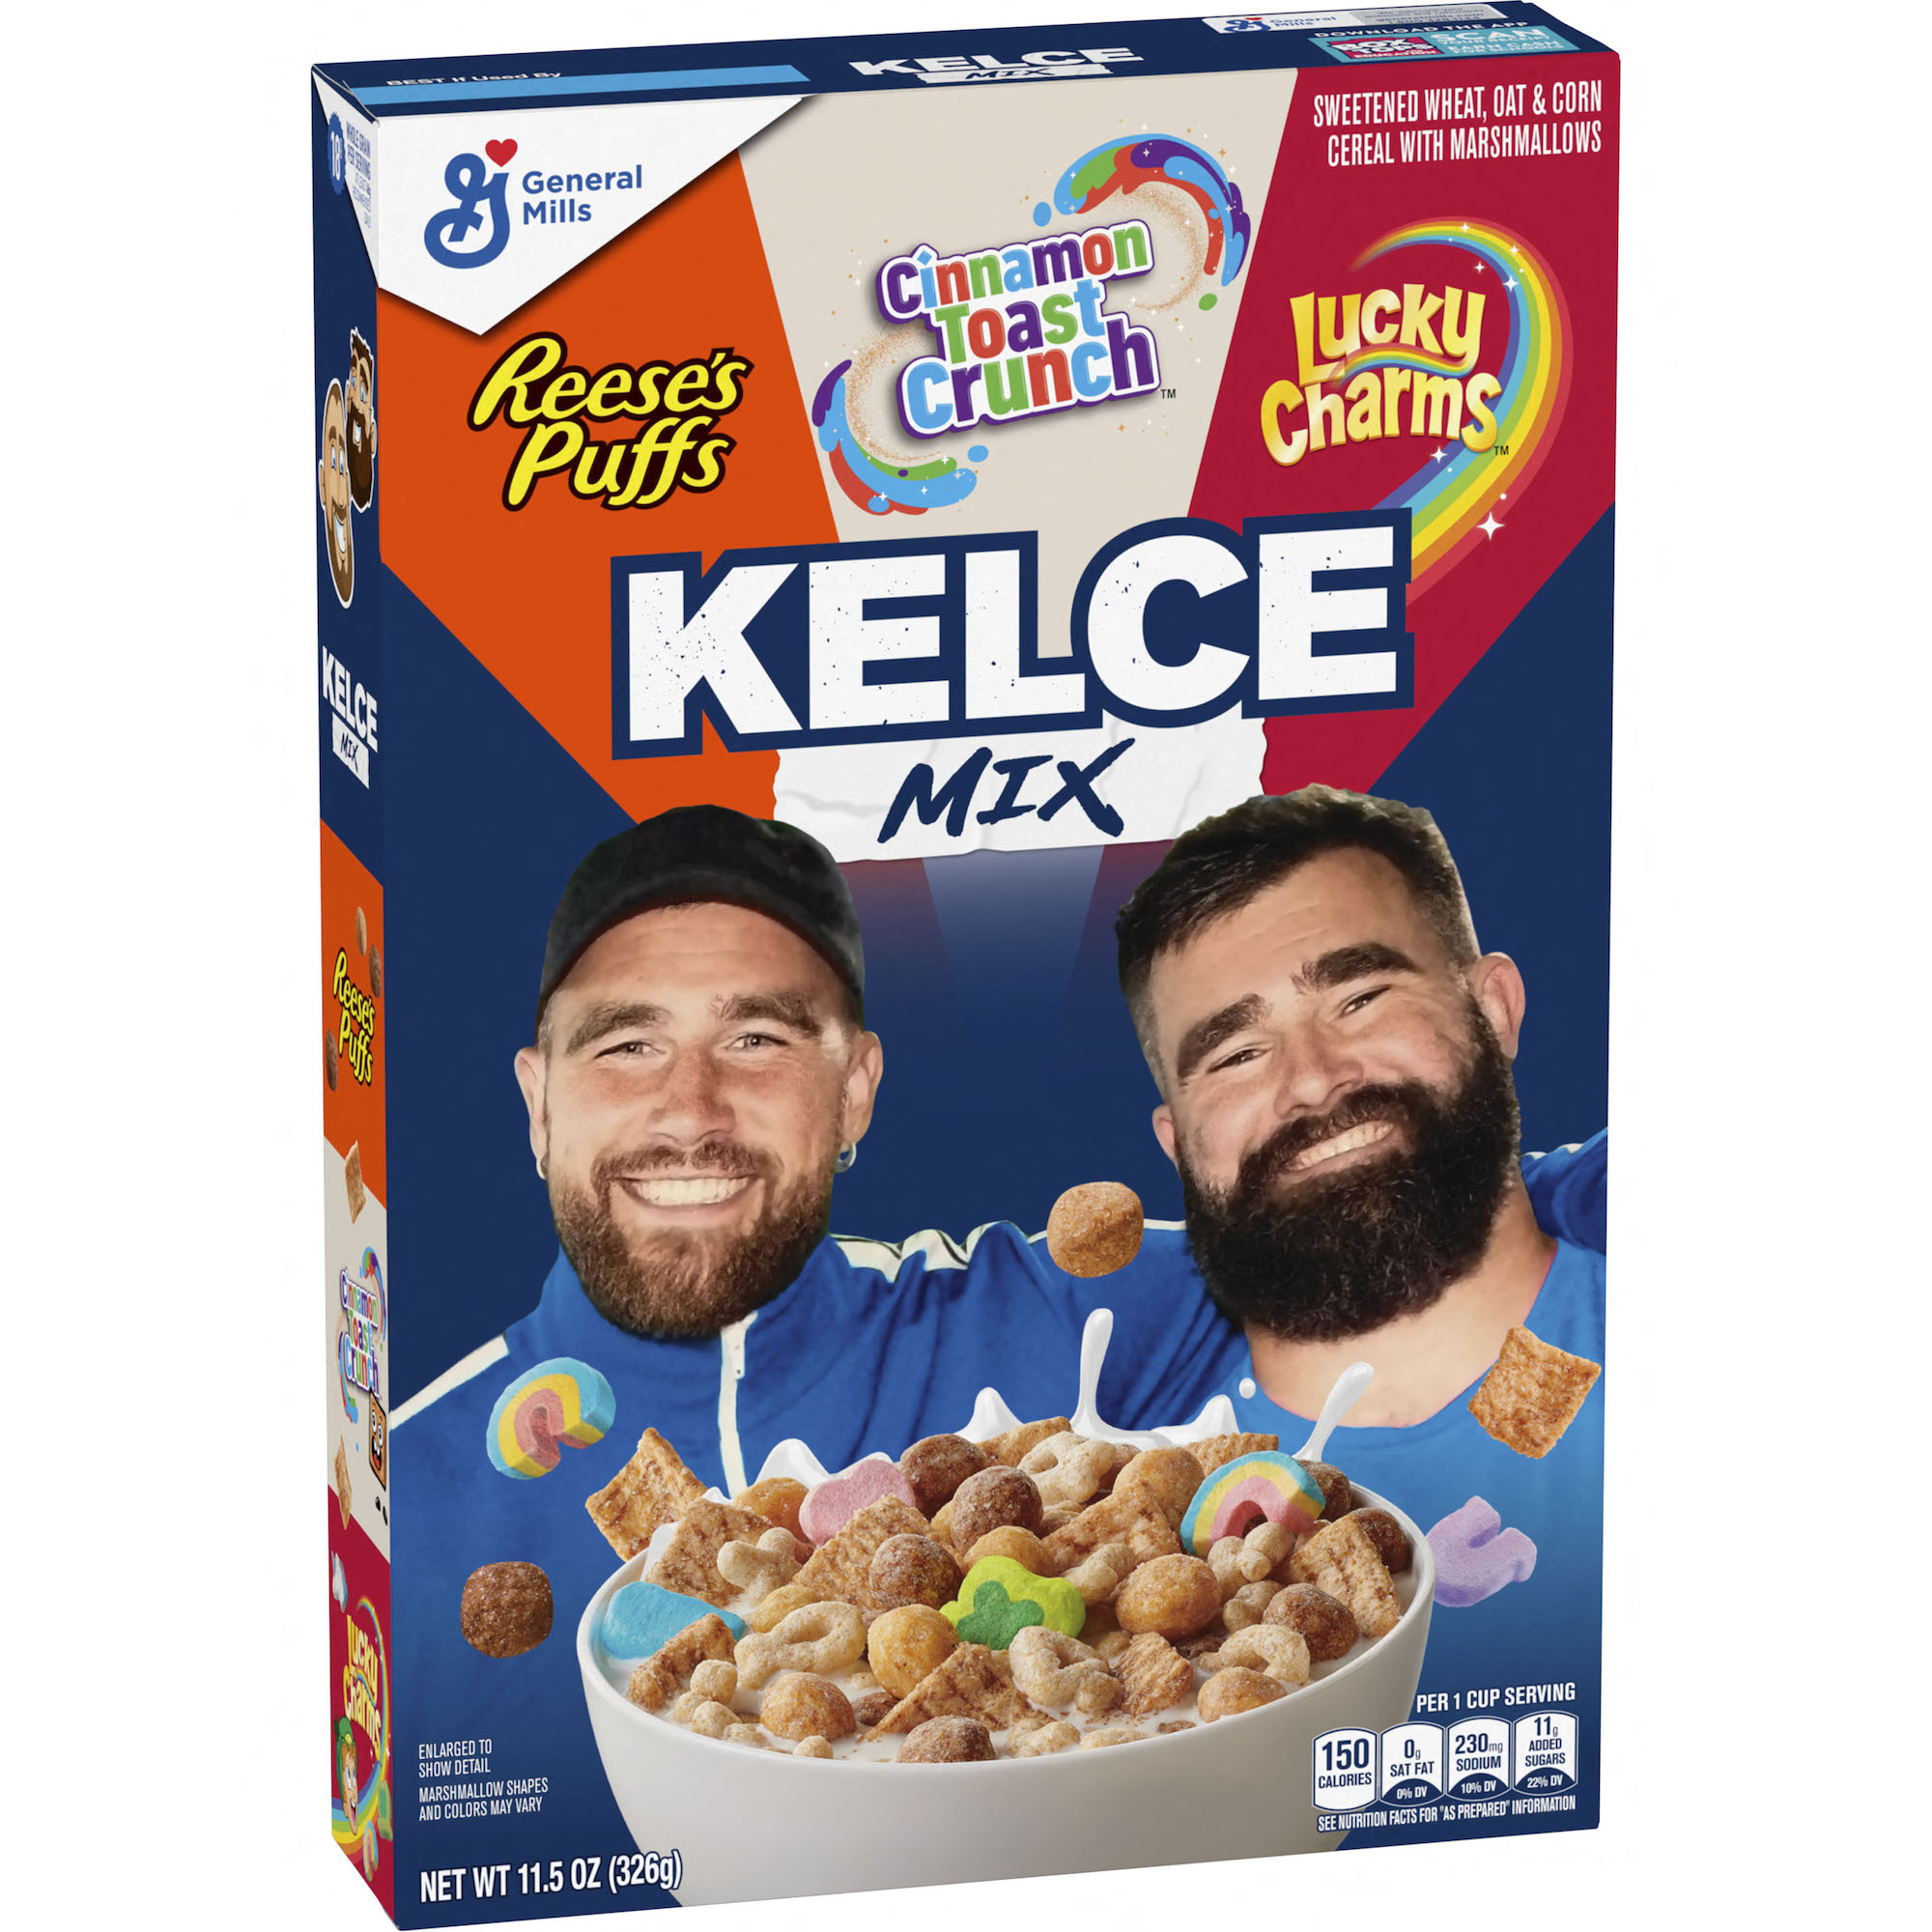 Jason Kelce Responds to Criticism of Cereal